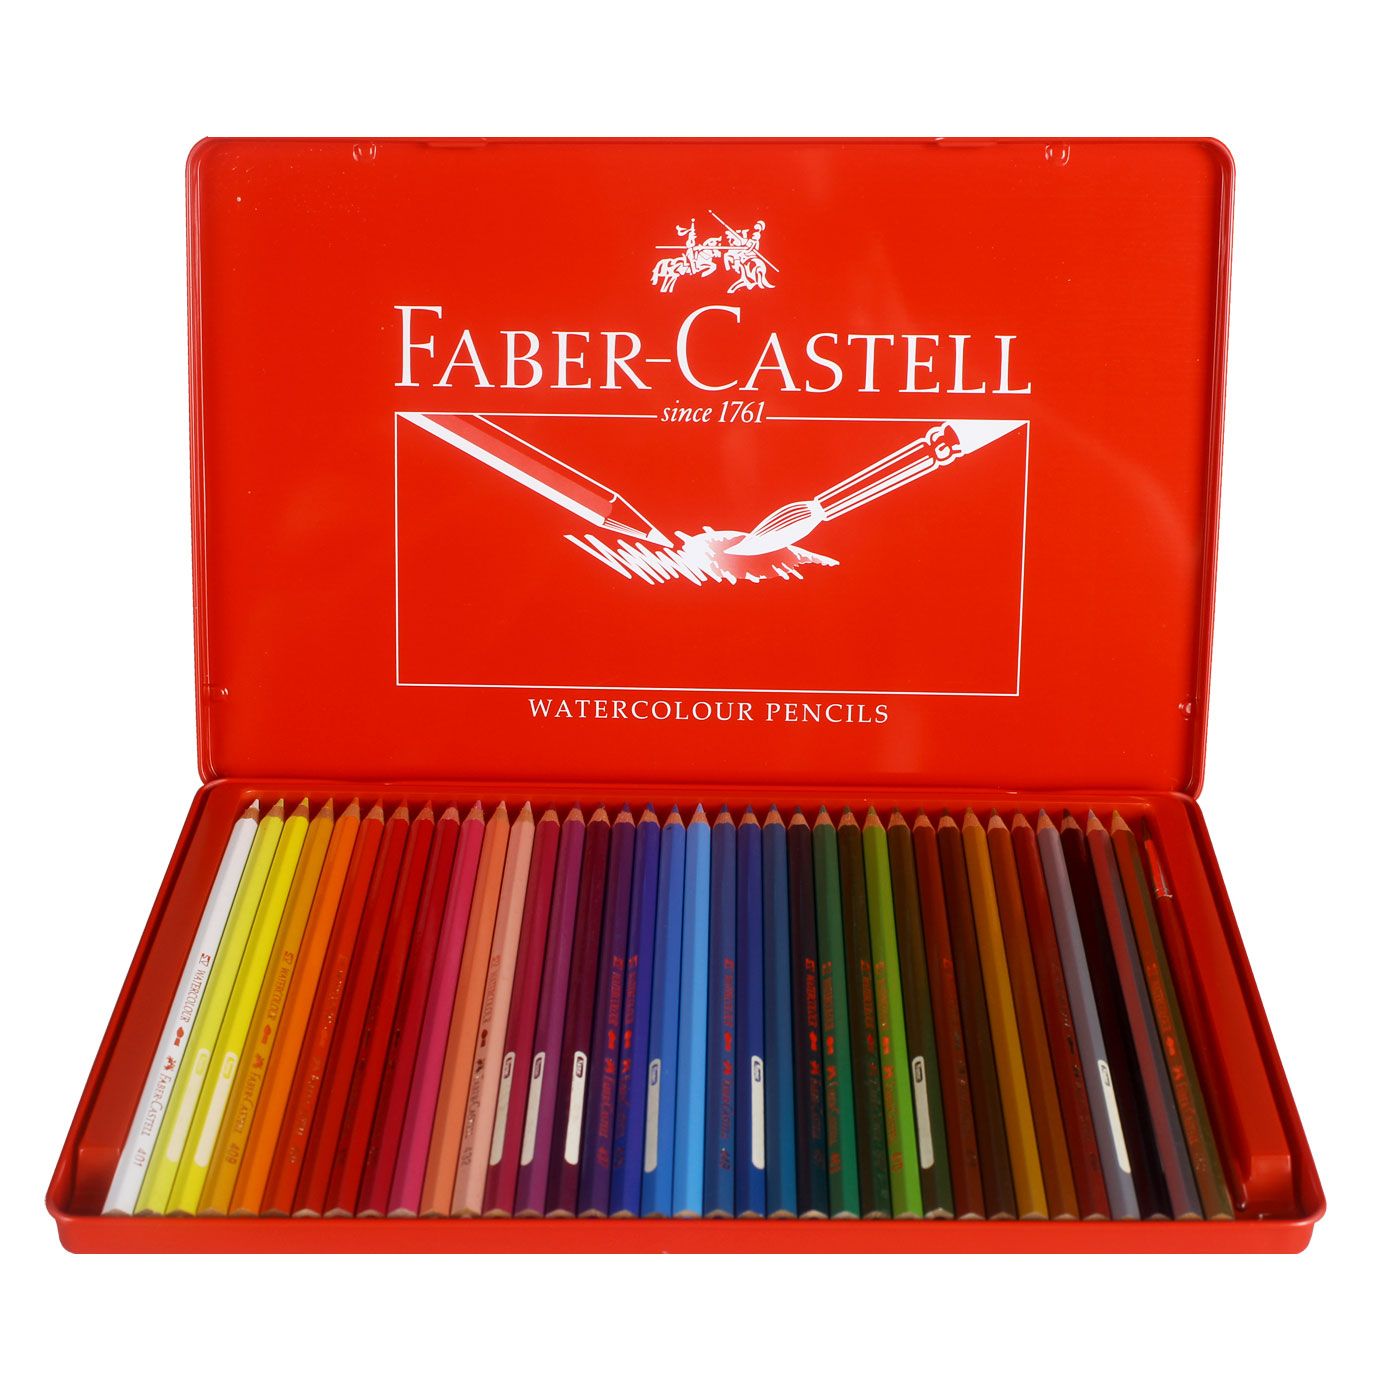 Faber Castell Watercolour Pencils in Tin Case (Isi 36) - 2